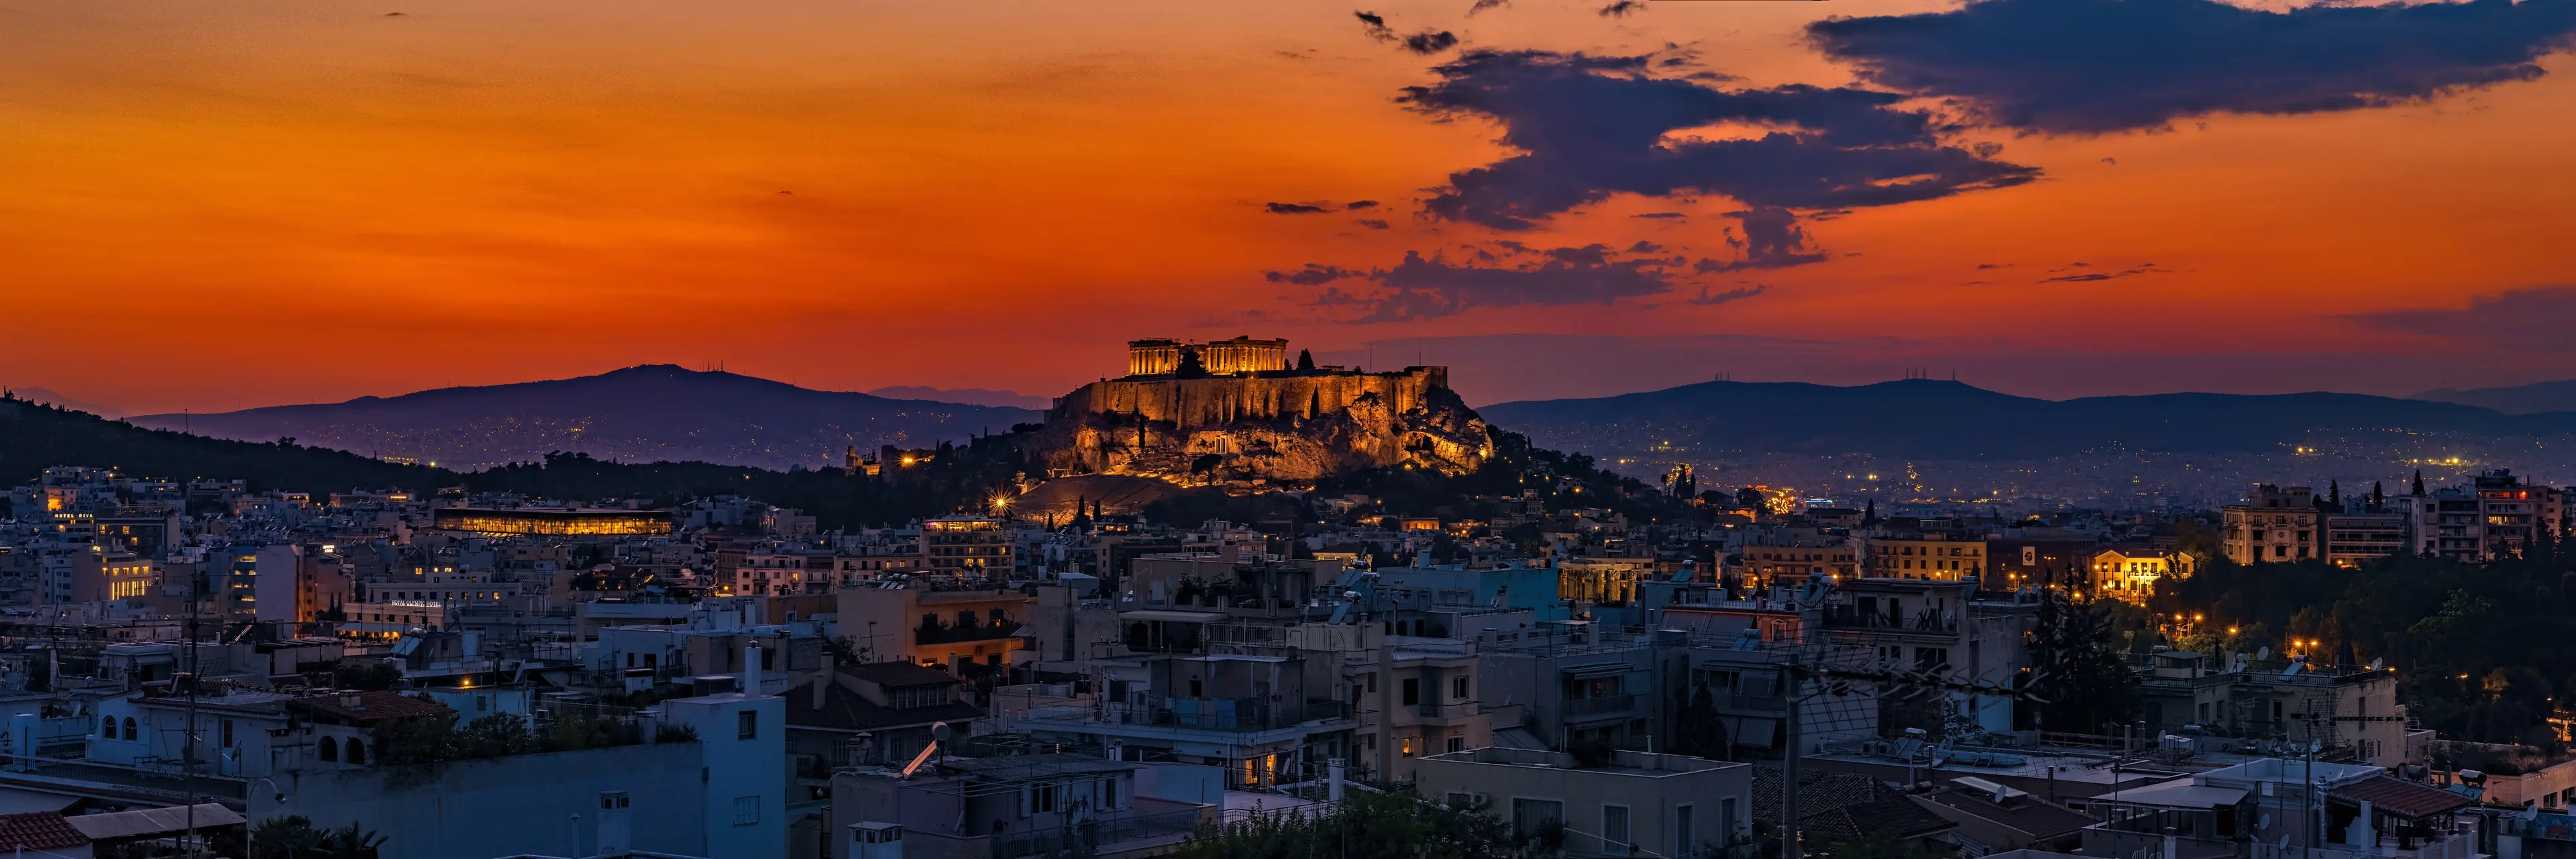 Explore Historic Athens, Greece in 2 Days Itinerary